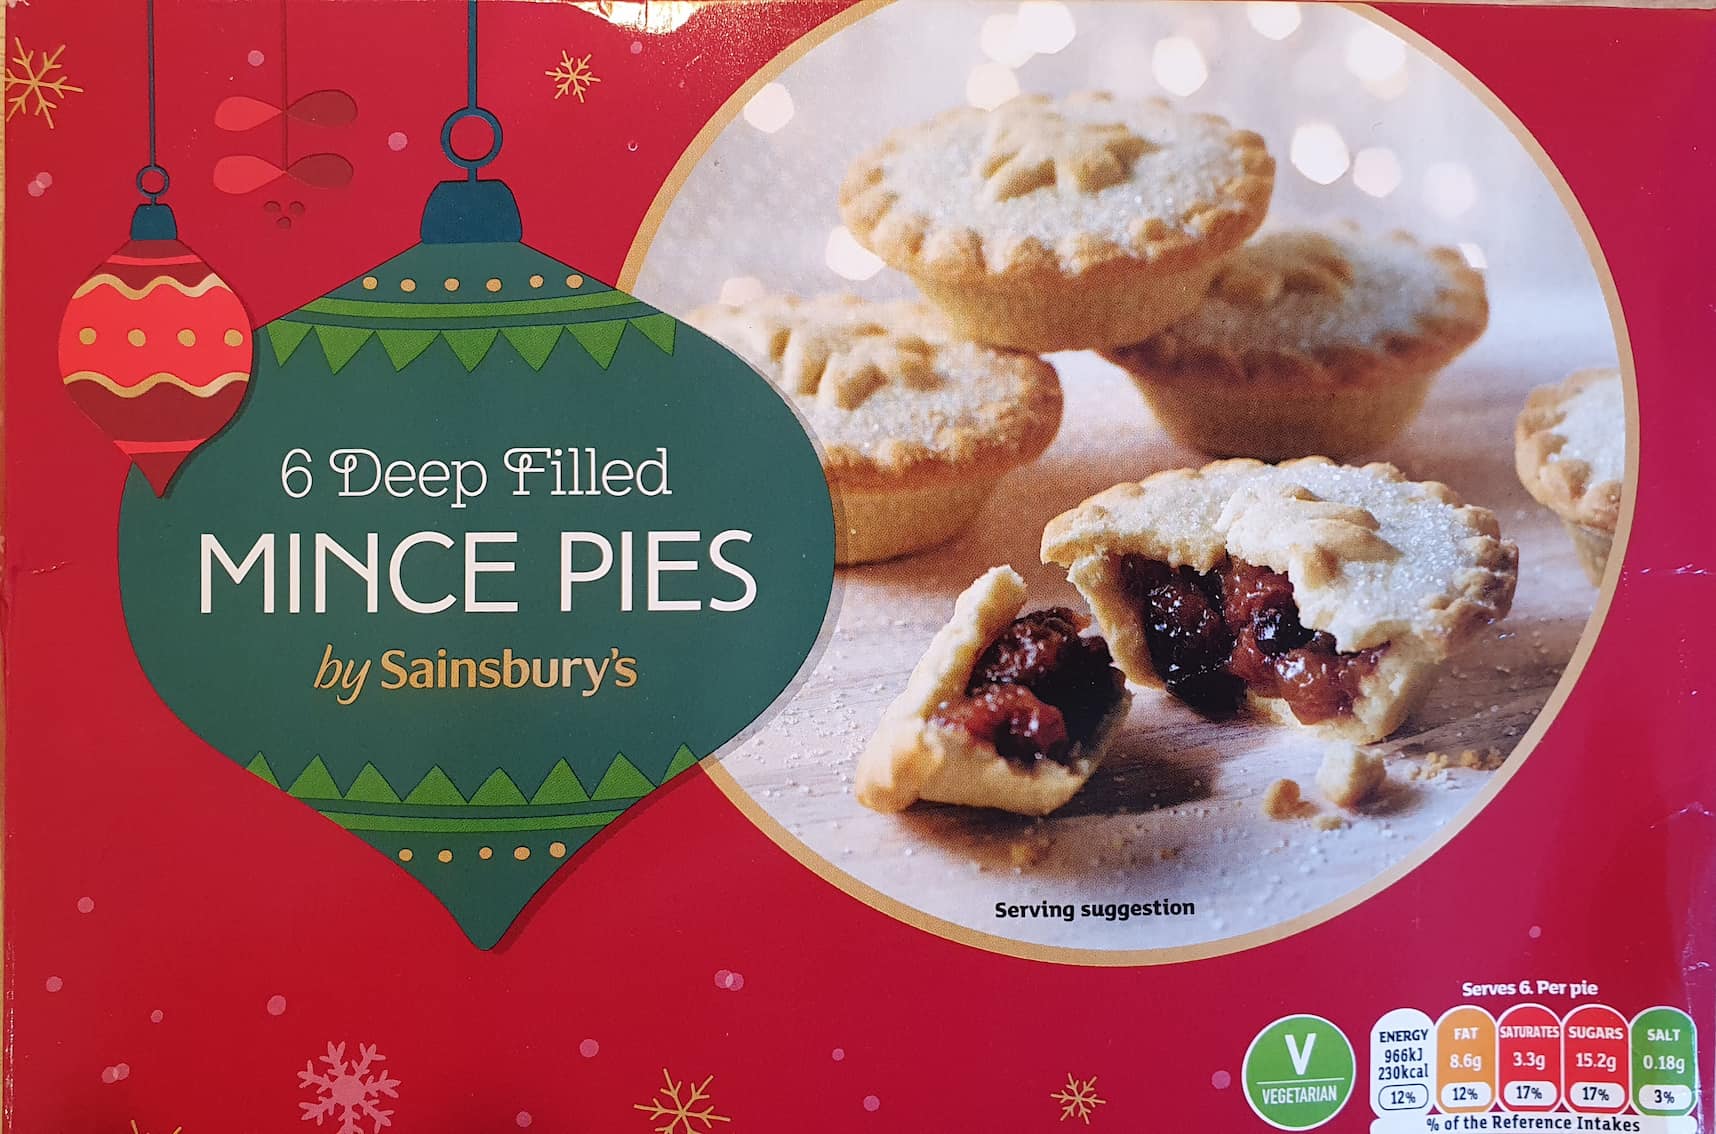 Sainsbury's Deep Filled Mince Pie Review 2021